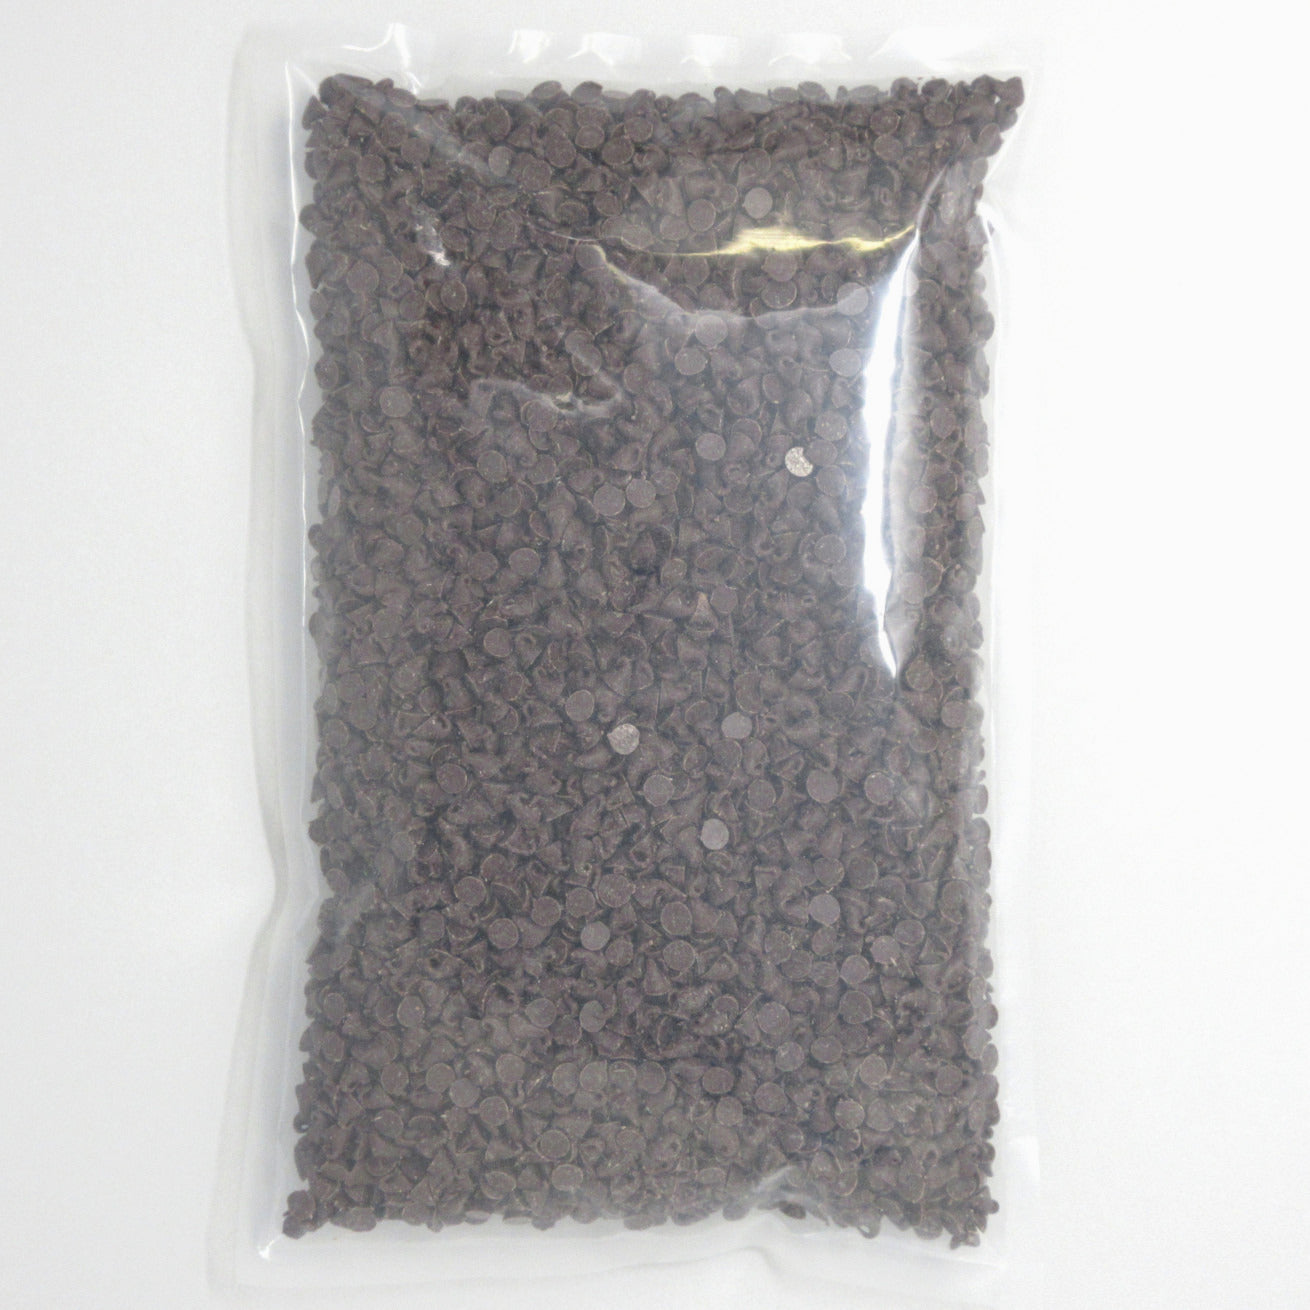 Flour Barrel product image - Chocolate Chips Small